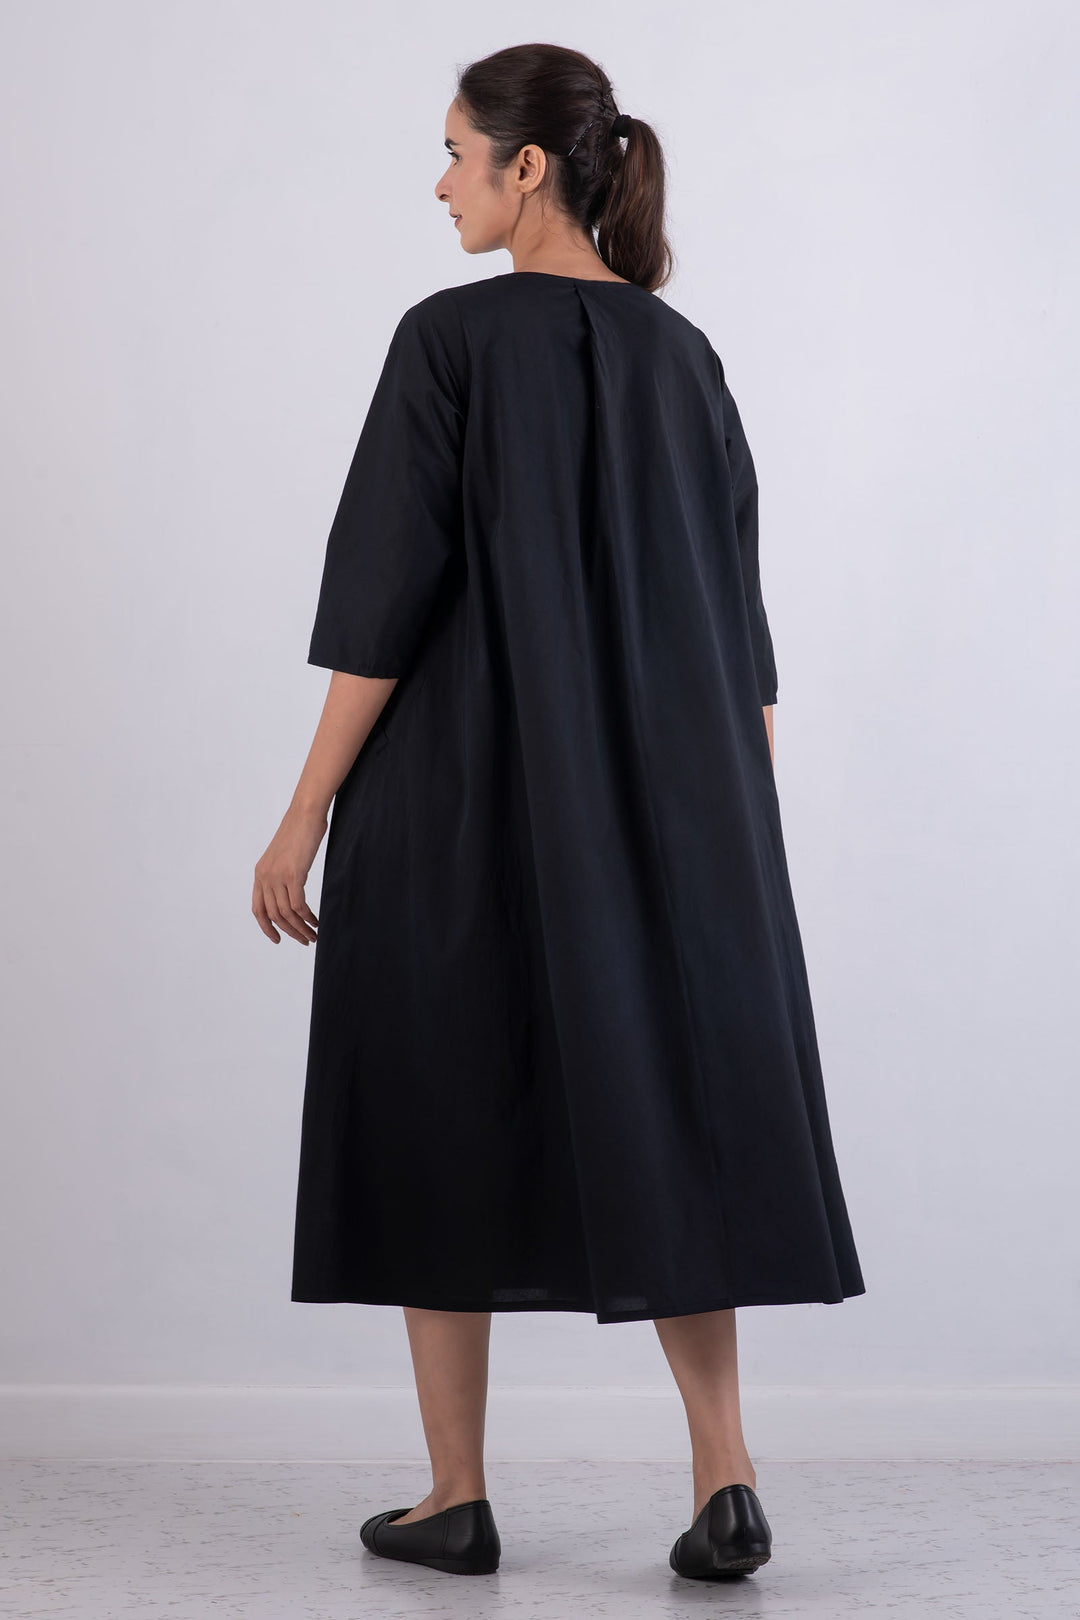 DYED COTTON SILK HEAVY VOILE WAVY V-NECK MAXI WITH SLEEVES  NEW STYLE PATTERN - dh1441-blk -